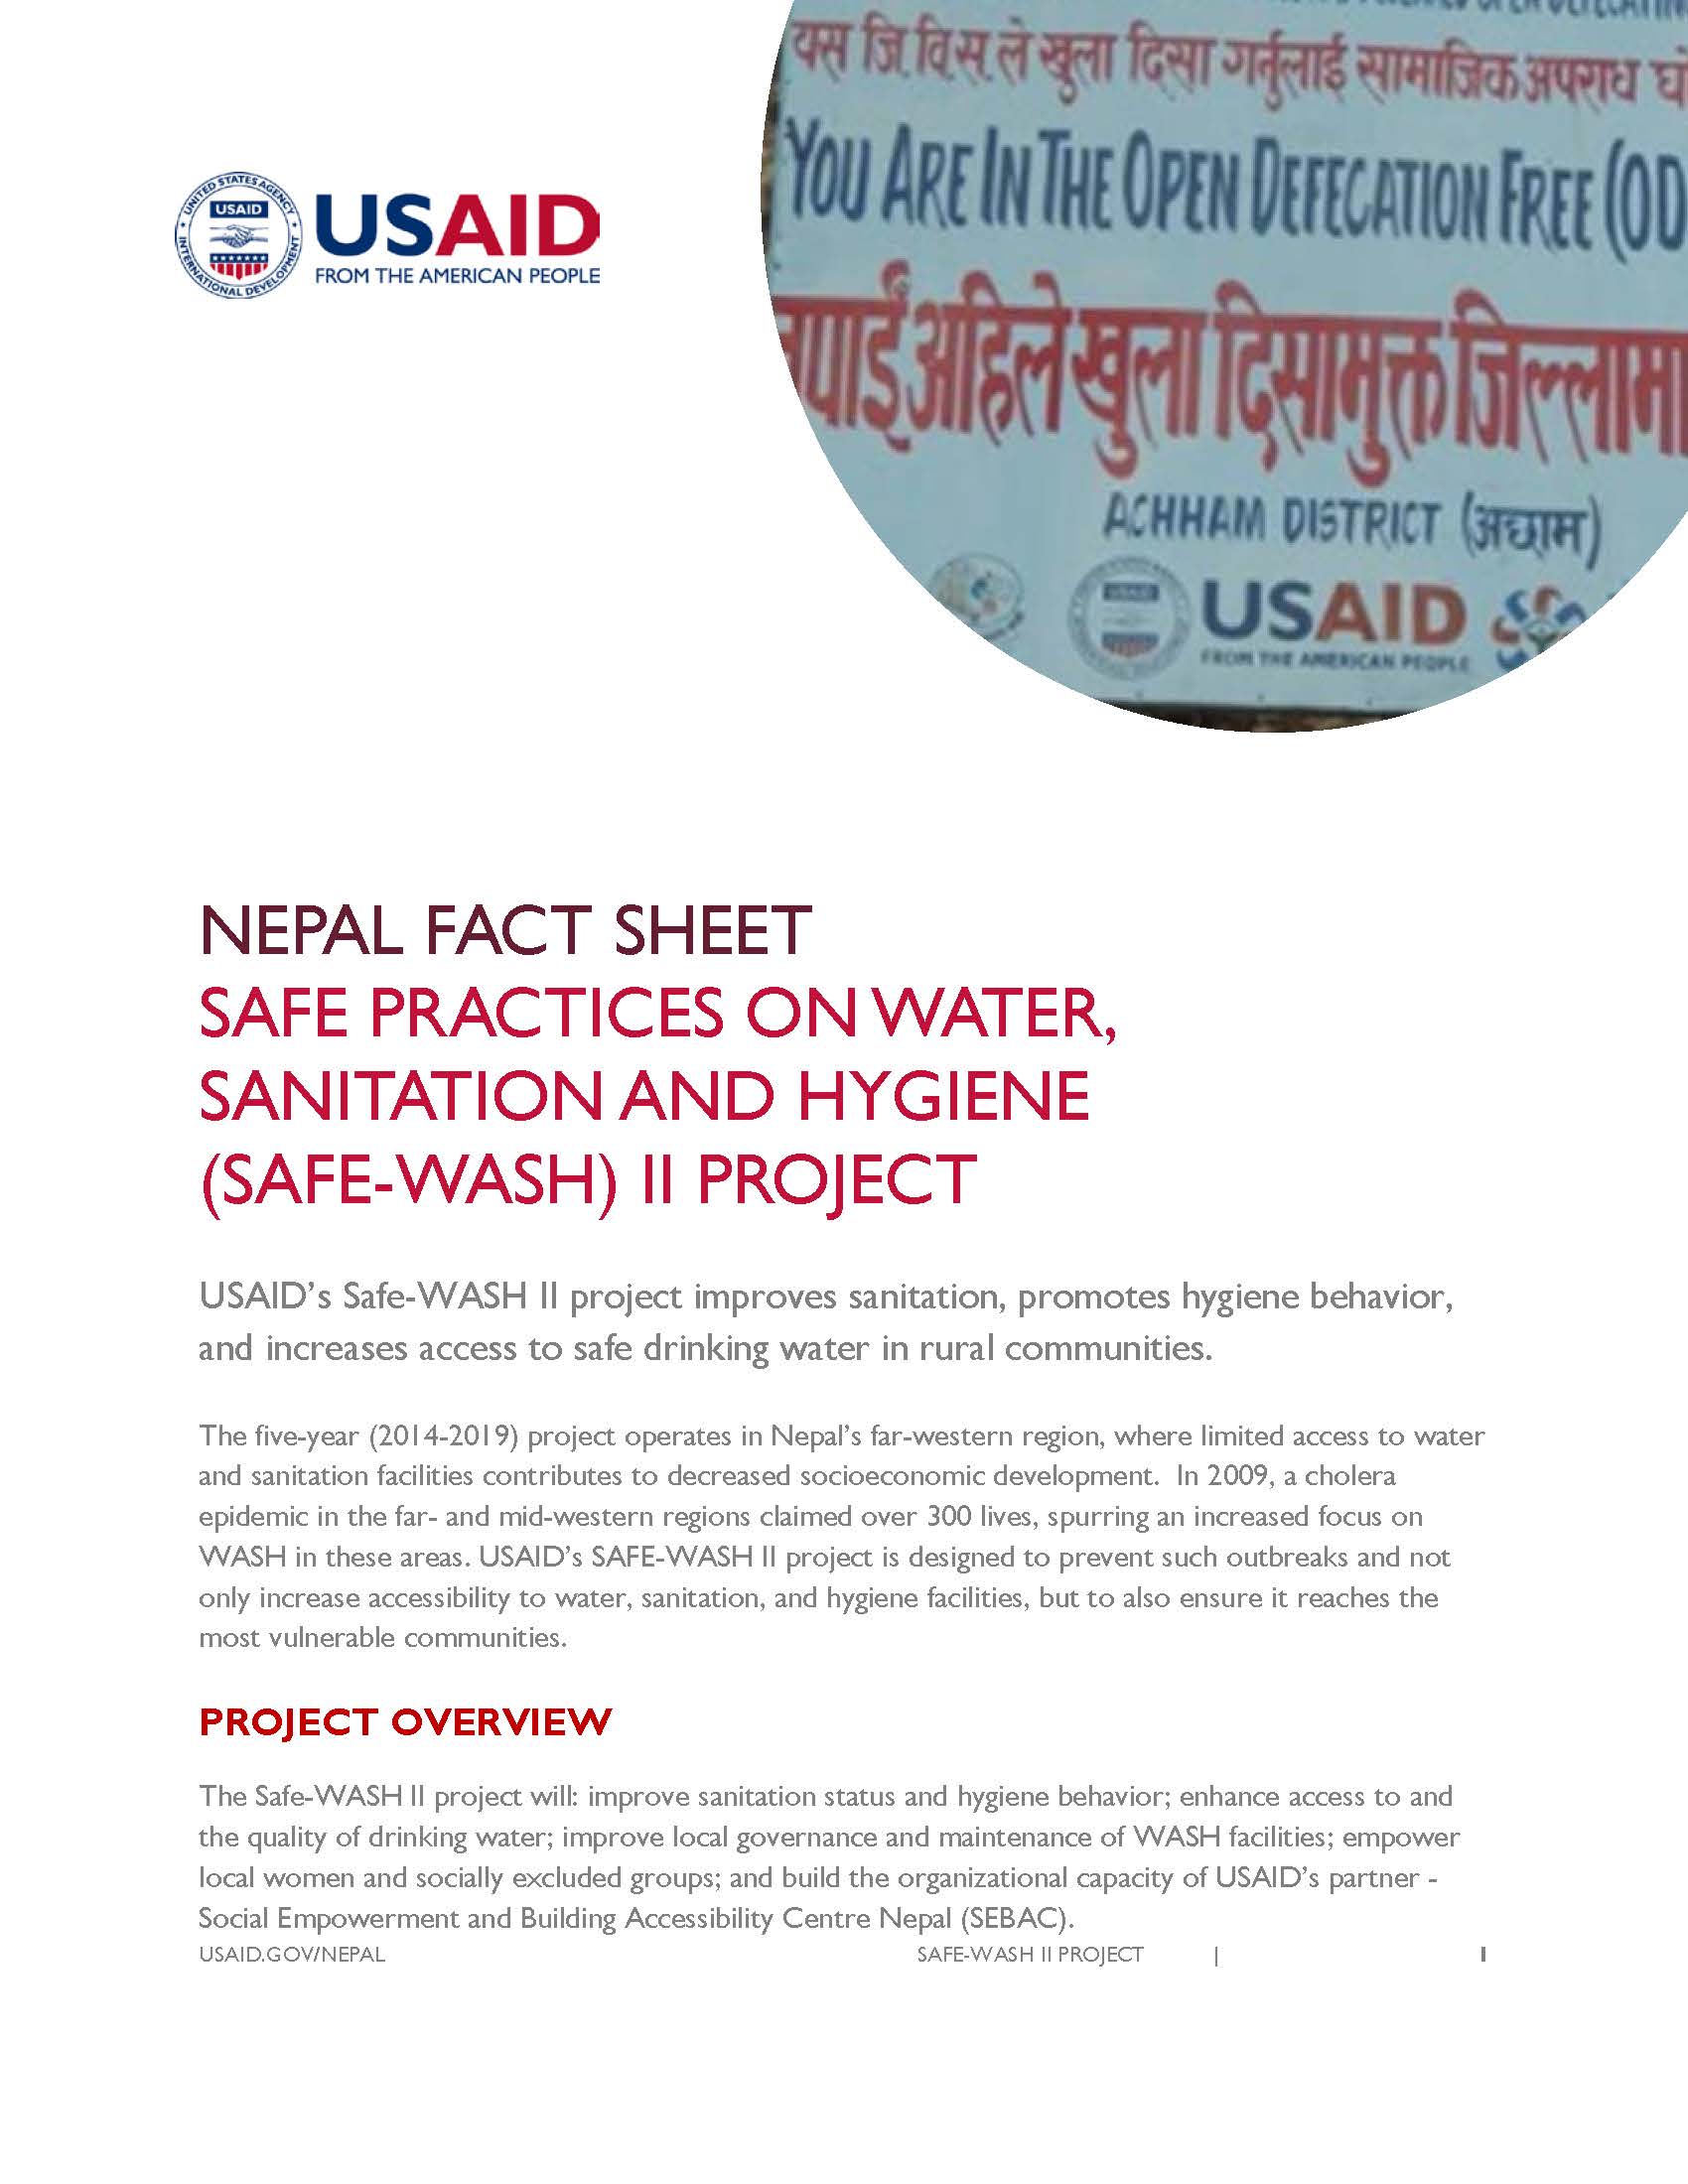 FACT SHEET:SAFE PRACTICES ON WATER, SANITATION AND HYGIENE (SAFE-WASH) II PROJECT